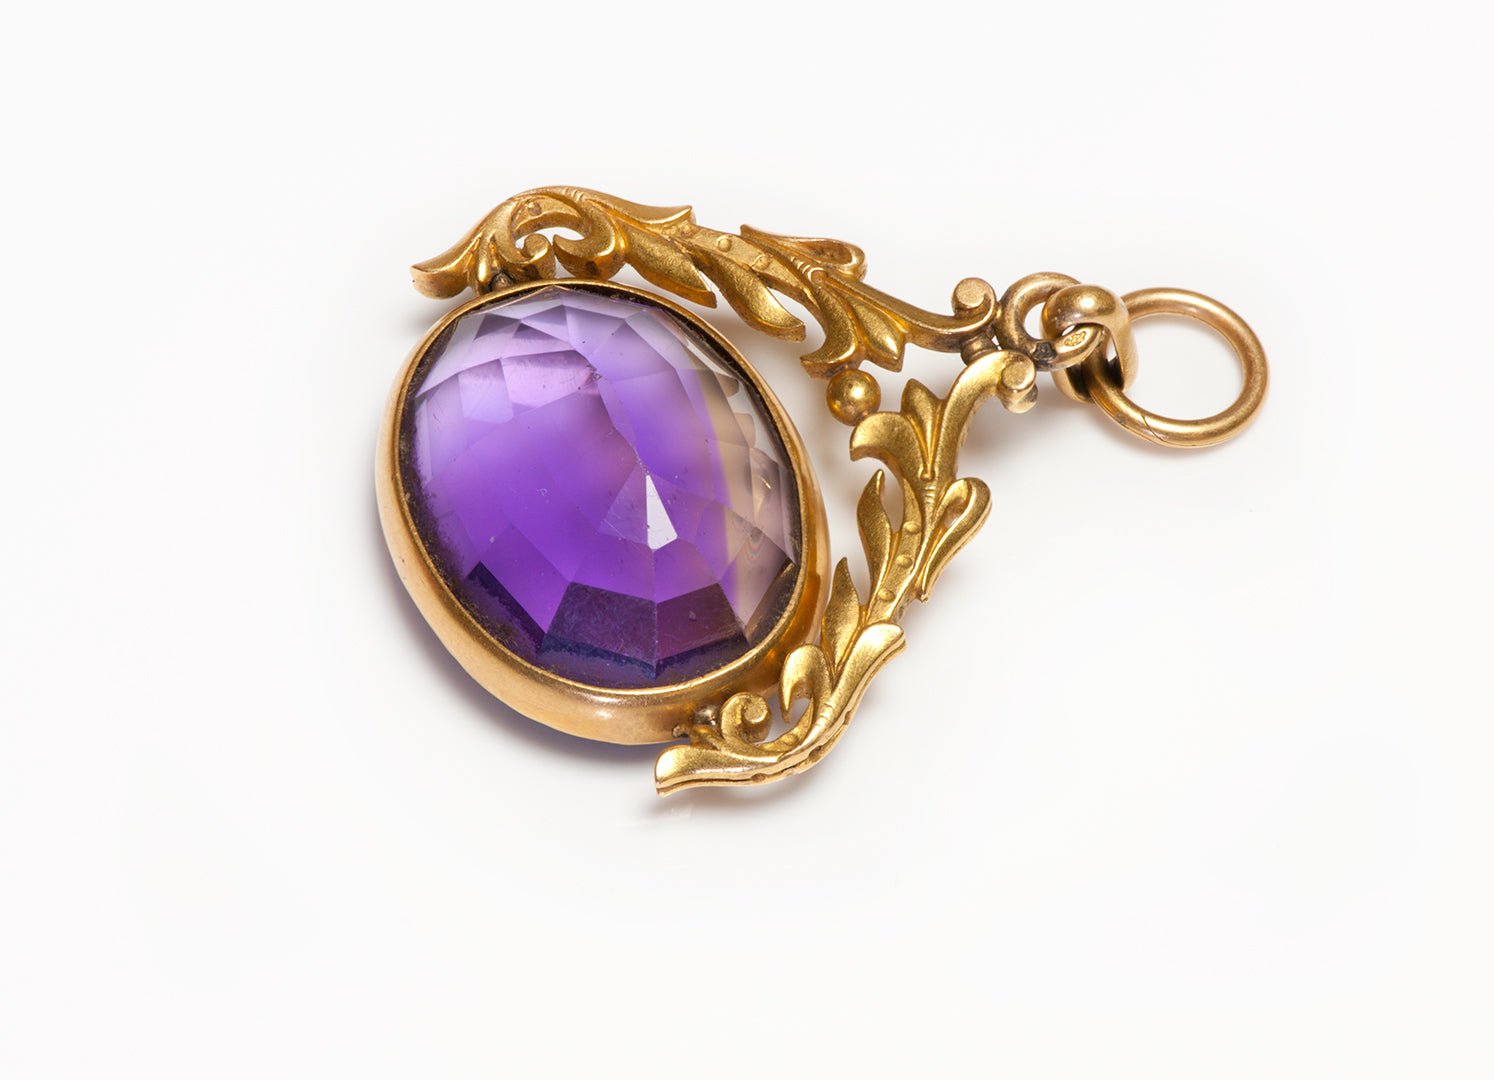 Antique Art Nouveau Yellow Gold Amethyst Fob - DSF Antique Jewelry